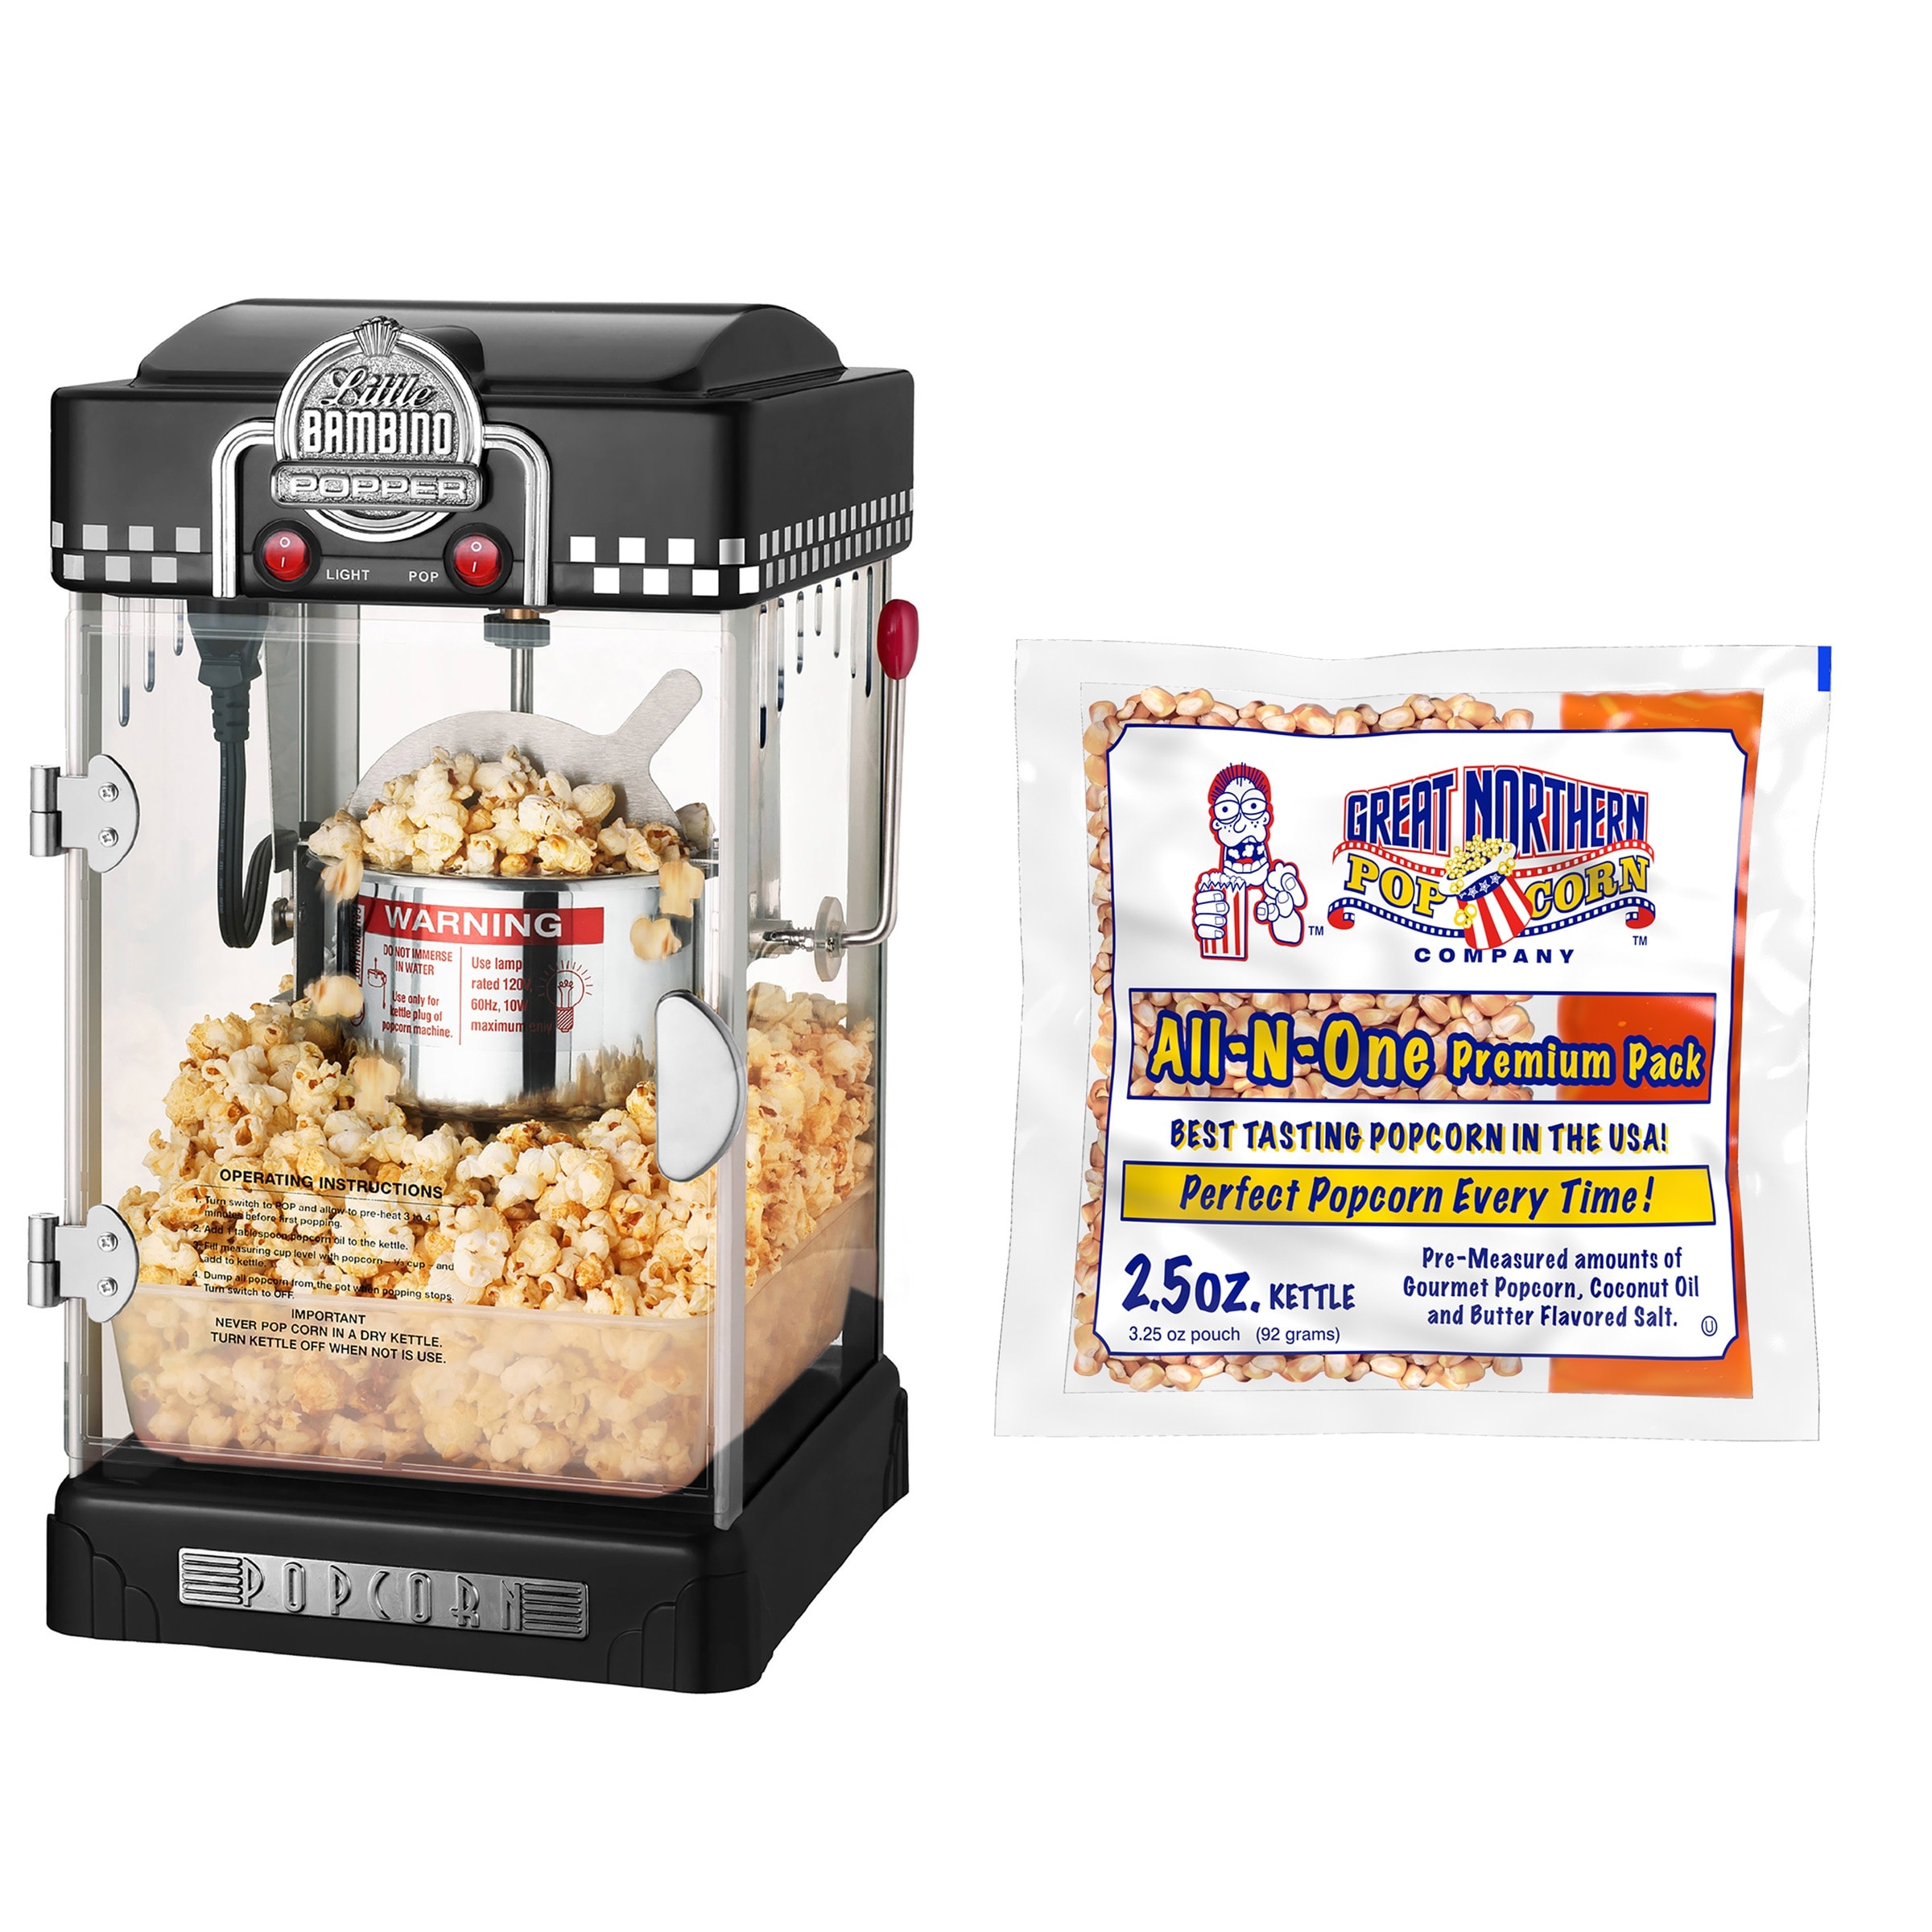 https://ak1.ostkcdn.com/images/products/is/images/direct/edb13c38dd45851199283a810bf3da53ae38477a/Little-Bambino-Popcorn-Machine-with-12-Pack-of-All-In-One-Popcorn-Kernel-Packets-by-Great-Northern-Popcorn-%28Black%29.jpg